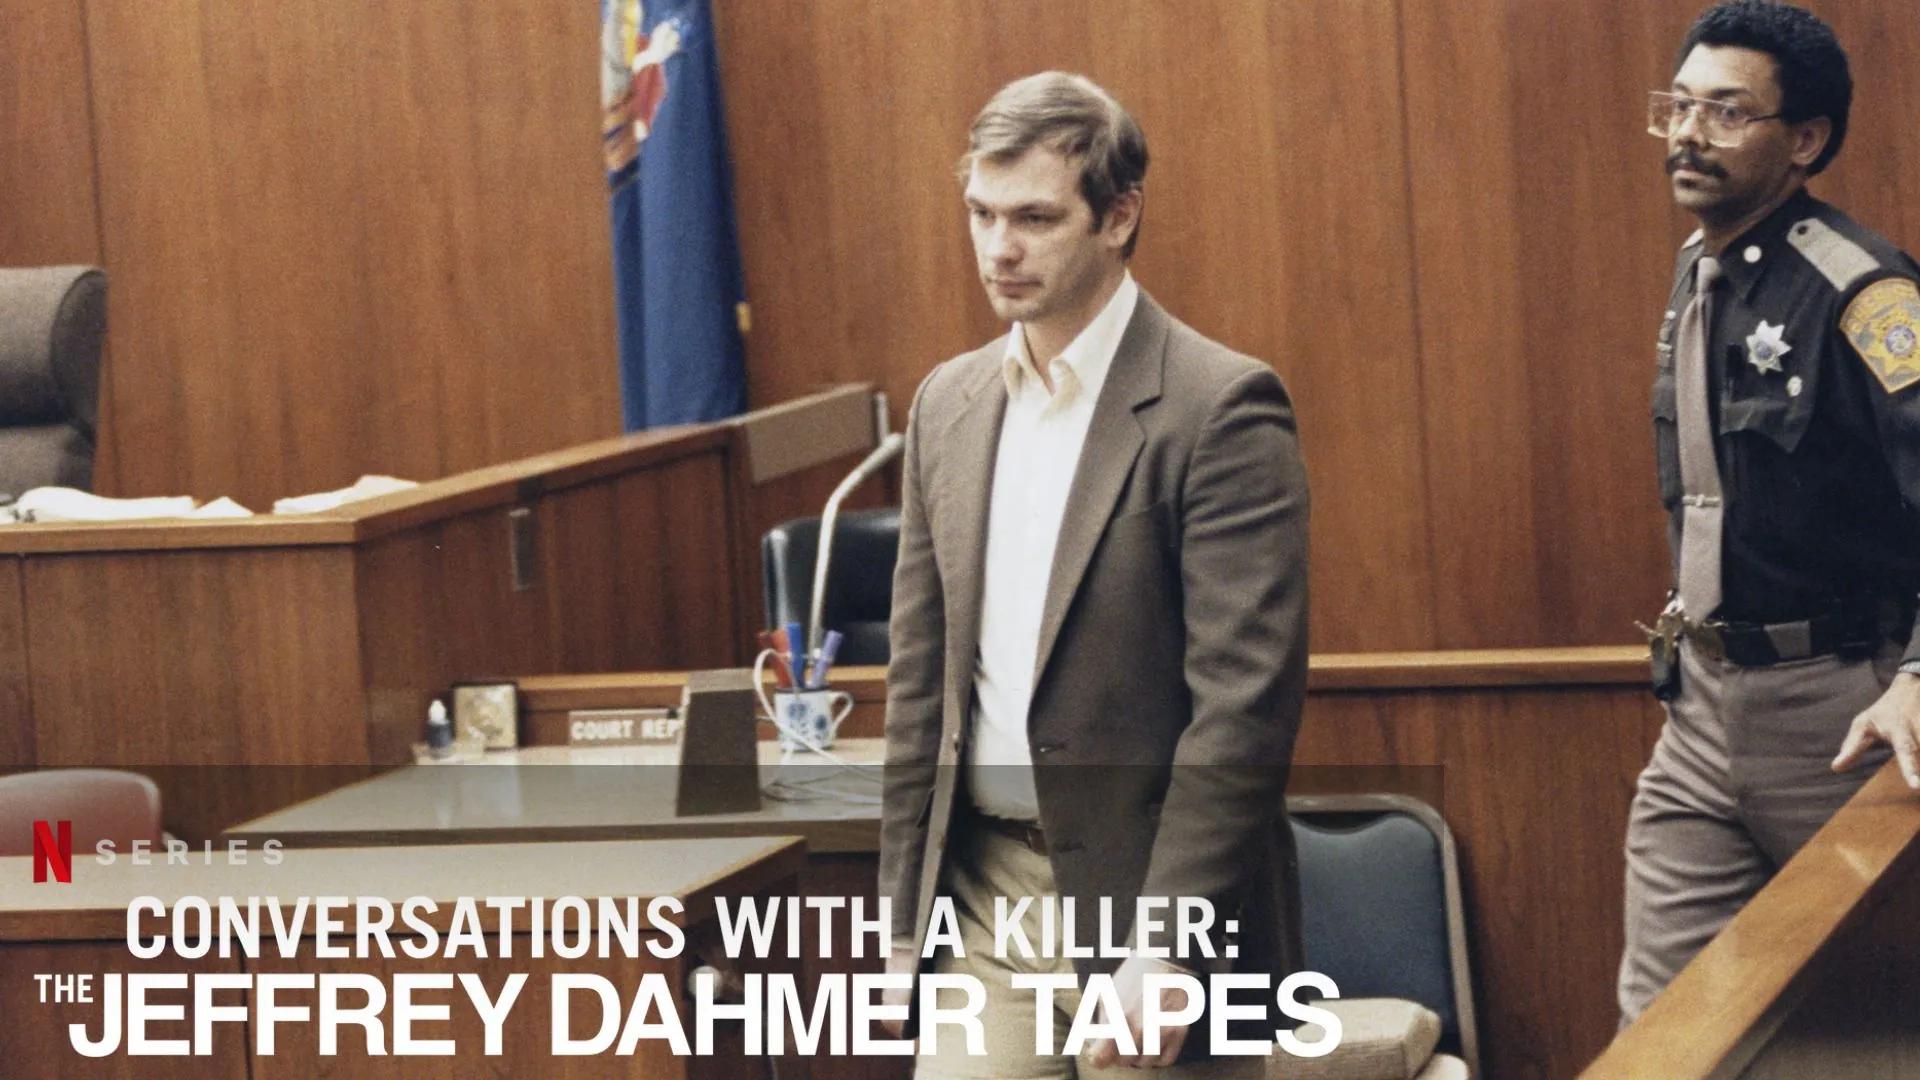 Conversation with killer: Jeffery Dahmer Tapes Parents Guide